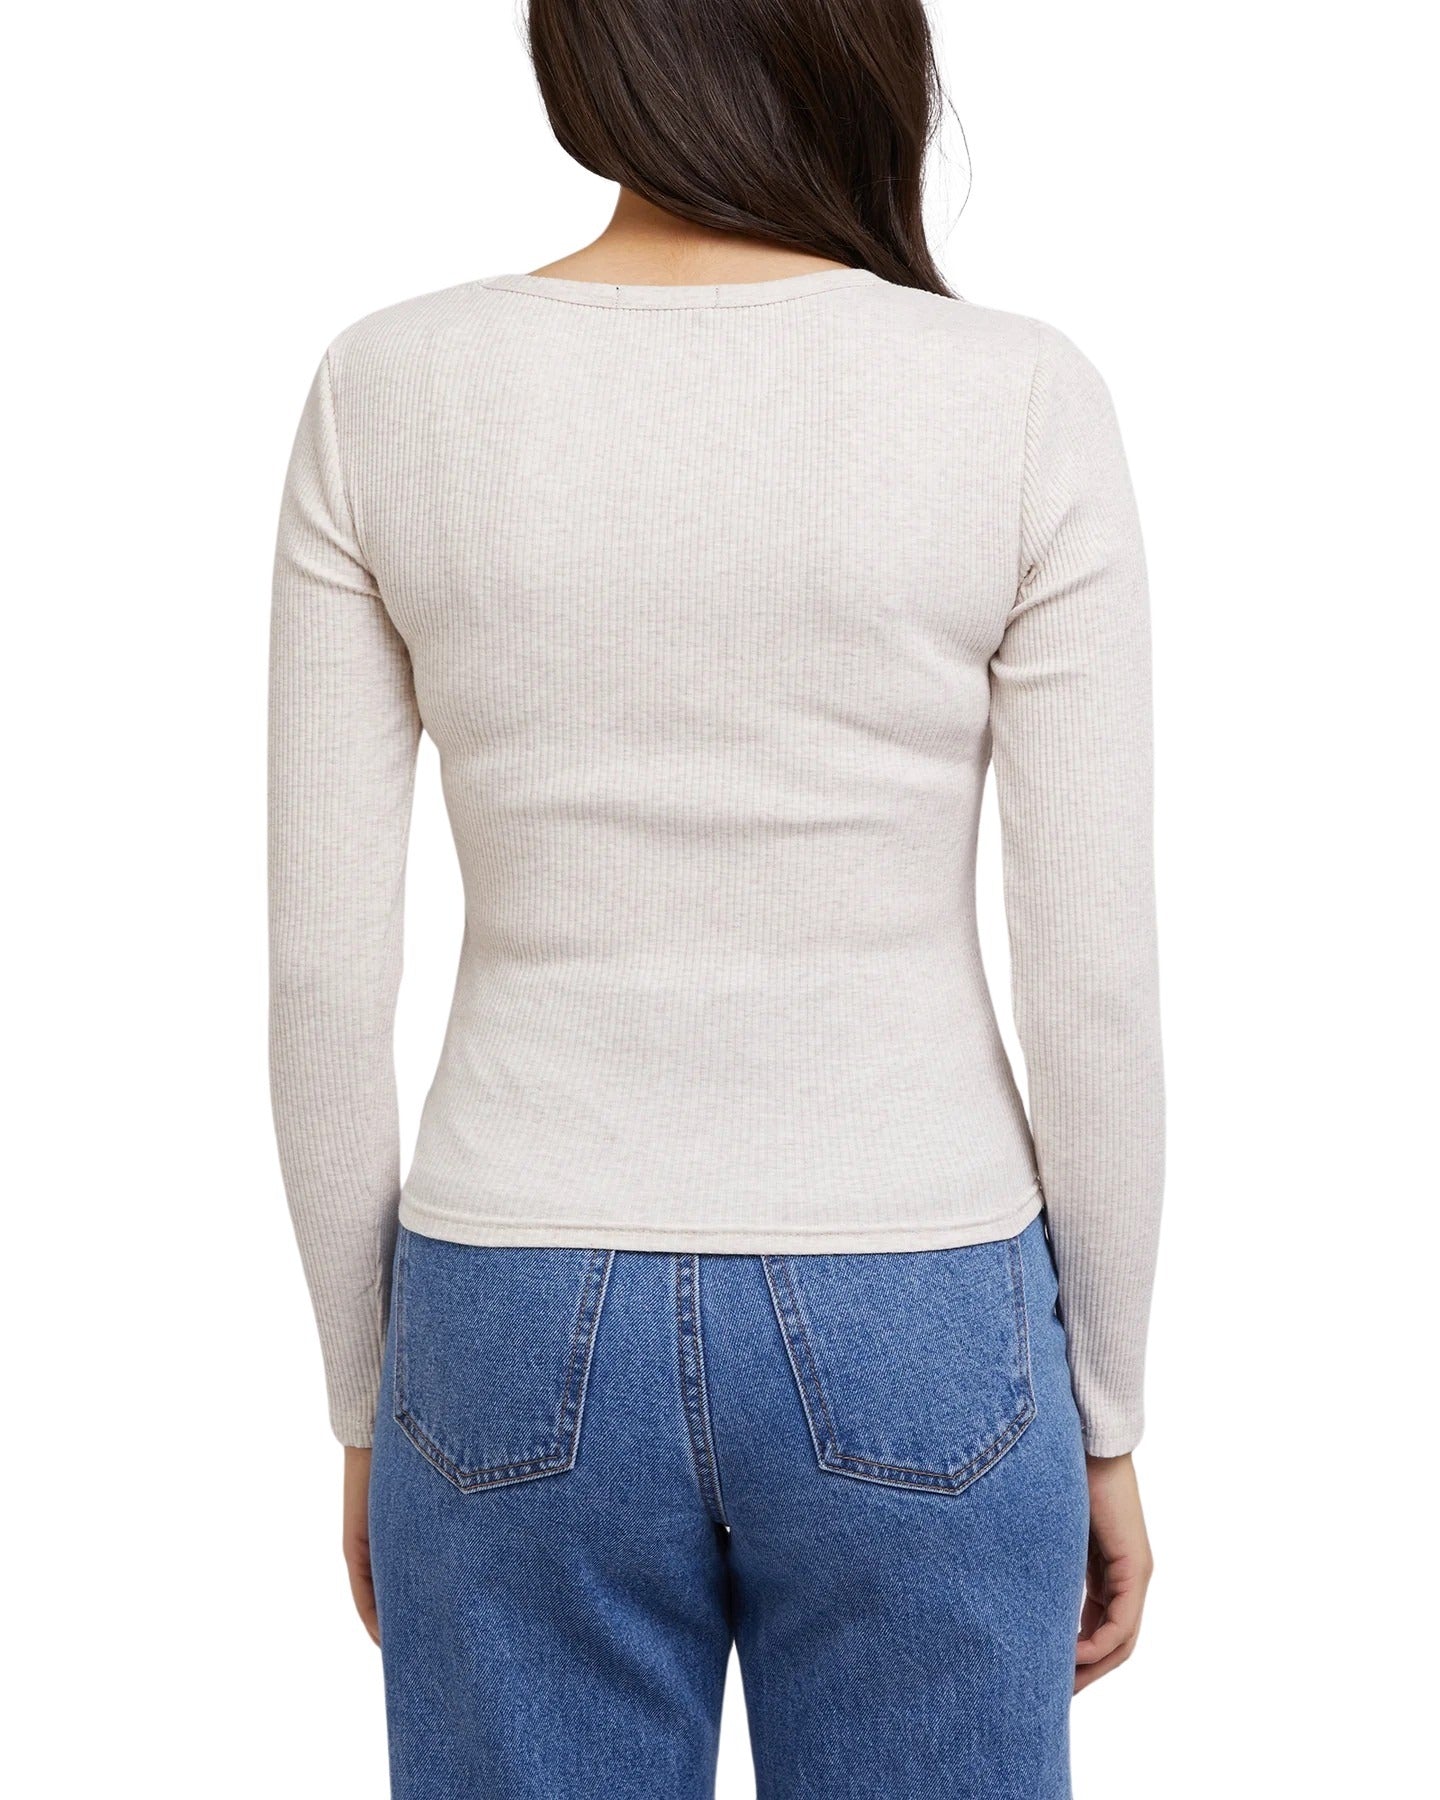 All About Eve - Eve Baby Rib V Neck Long Sleeve - Oatmeal